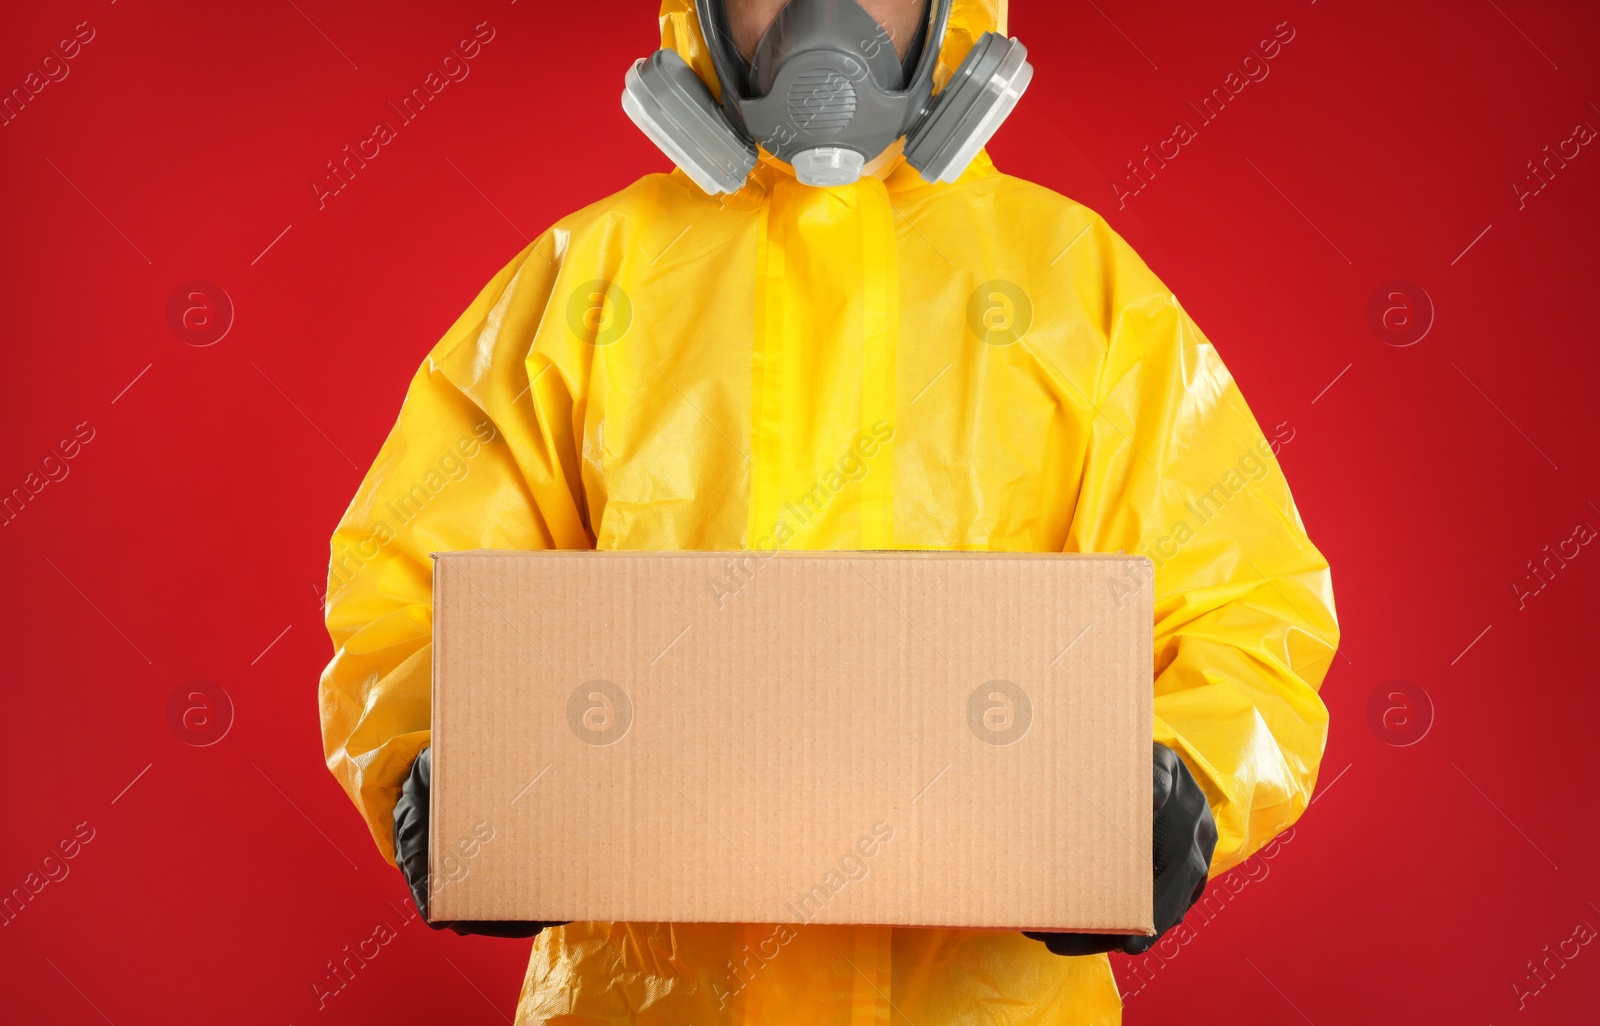 Photo of Man wearing chemical protective suit with cardboard box on red background, closeup. Prevention of virus spread